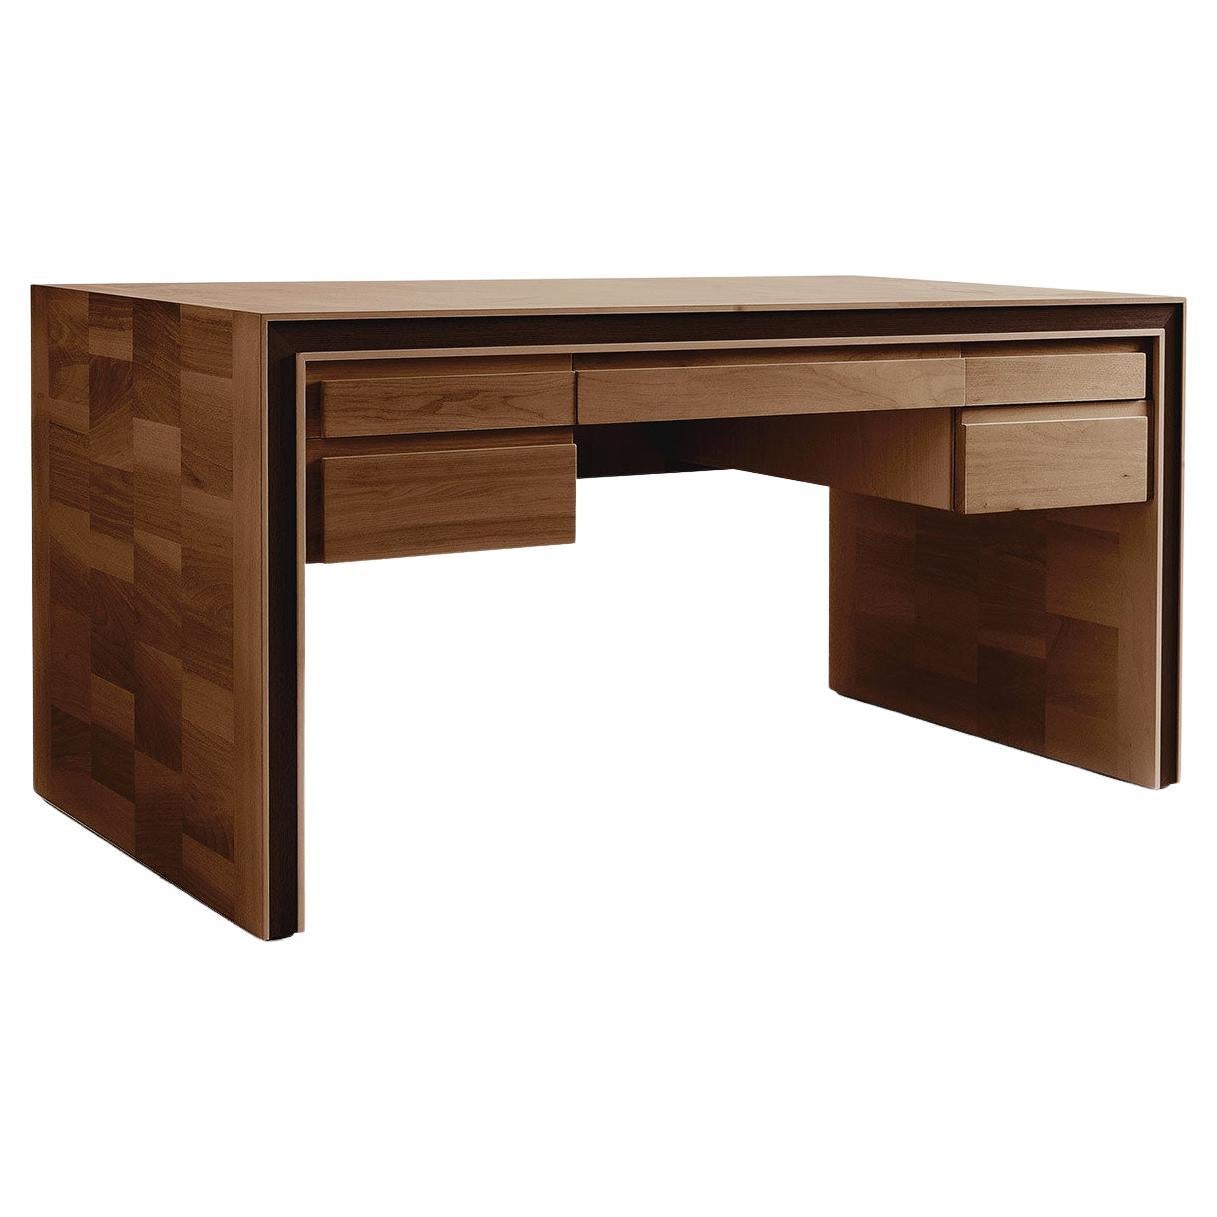 Gentile Solid Wood Desk, Walnut in Hand-Made Natural Finish, Contemporary